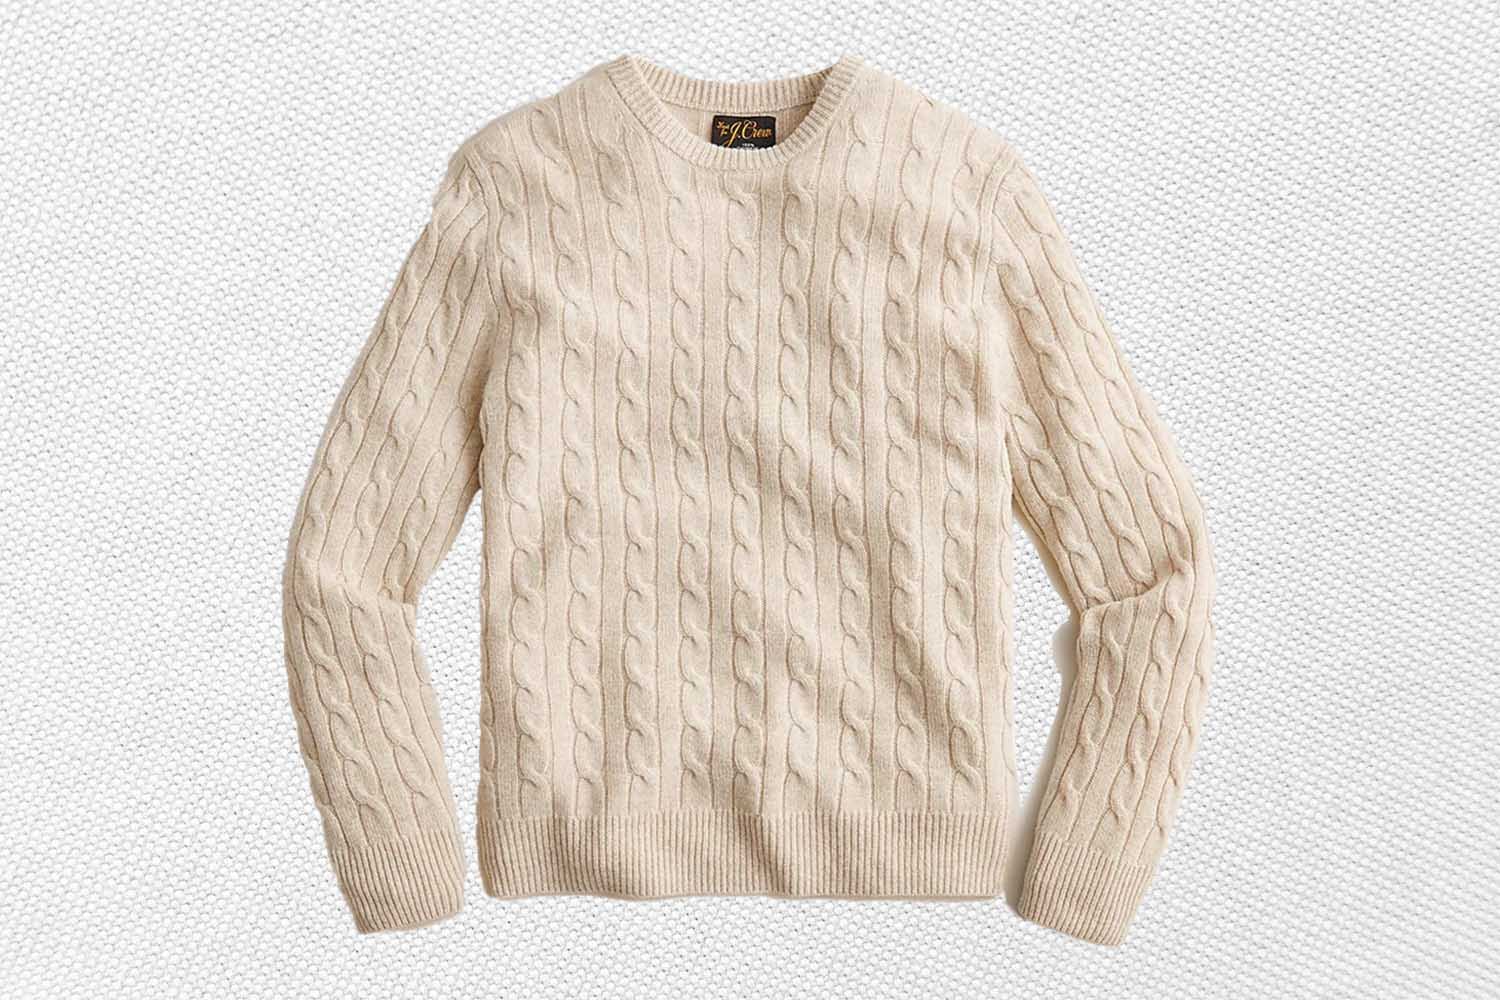 a white cable-knit cashmere sweater from J.Crew on a textured white background